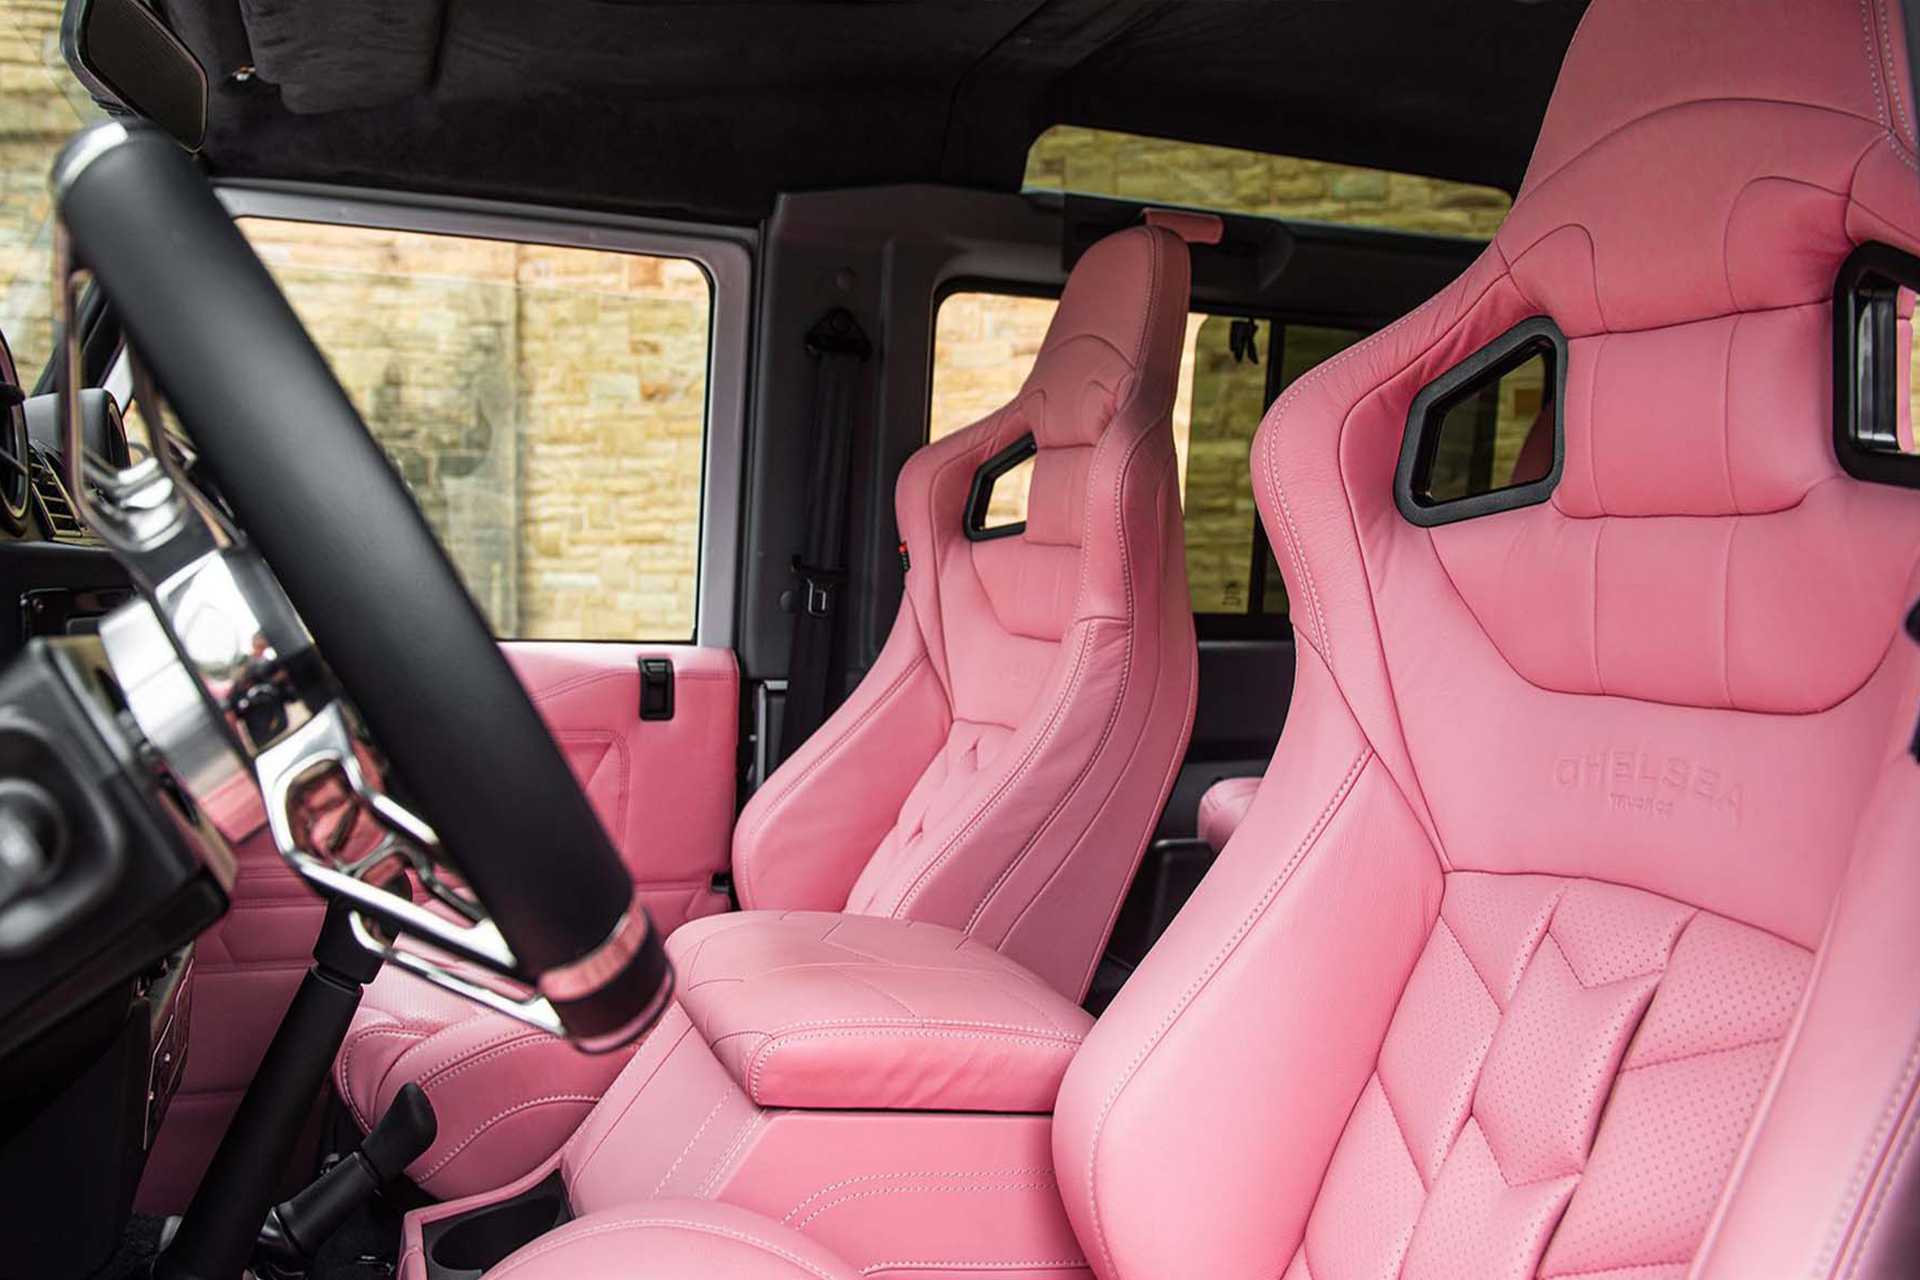 LAND ROVER DEFENDER 90 WITH PINK INTERIOR